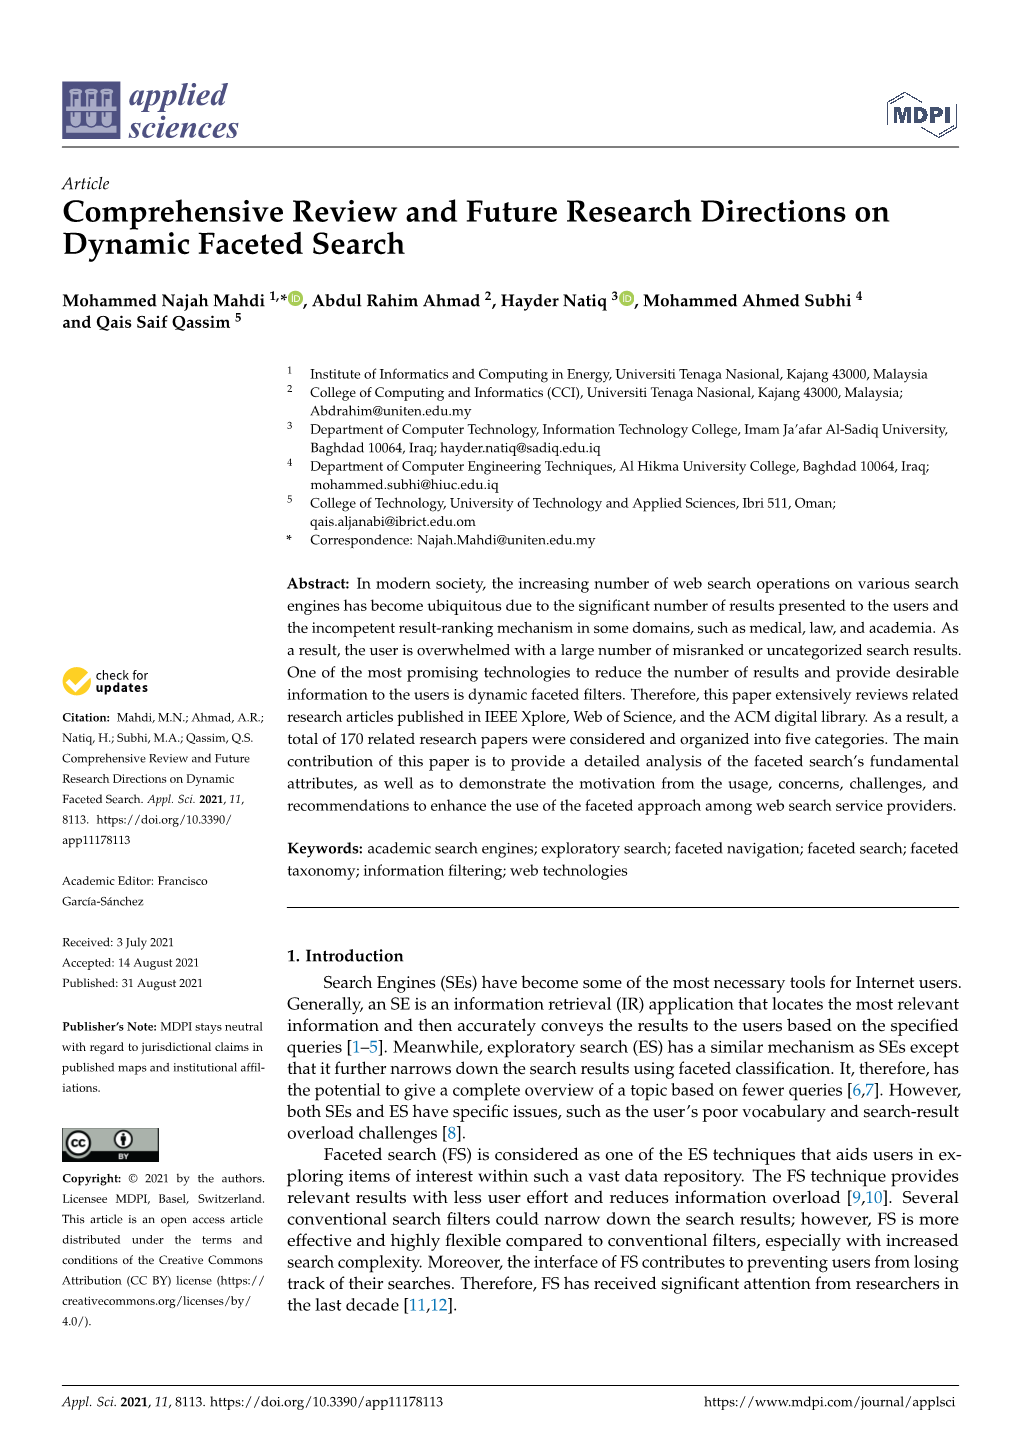 Comprehensive Review and Future Research Directions on Dynamic Faceted Search